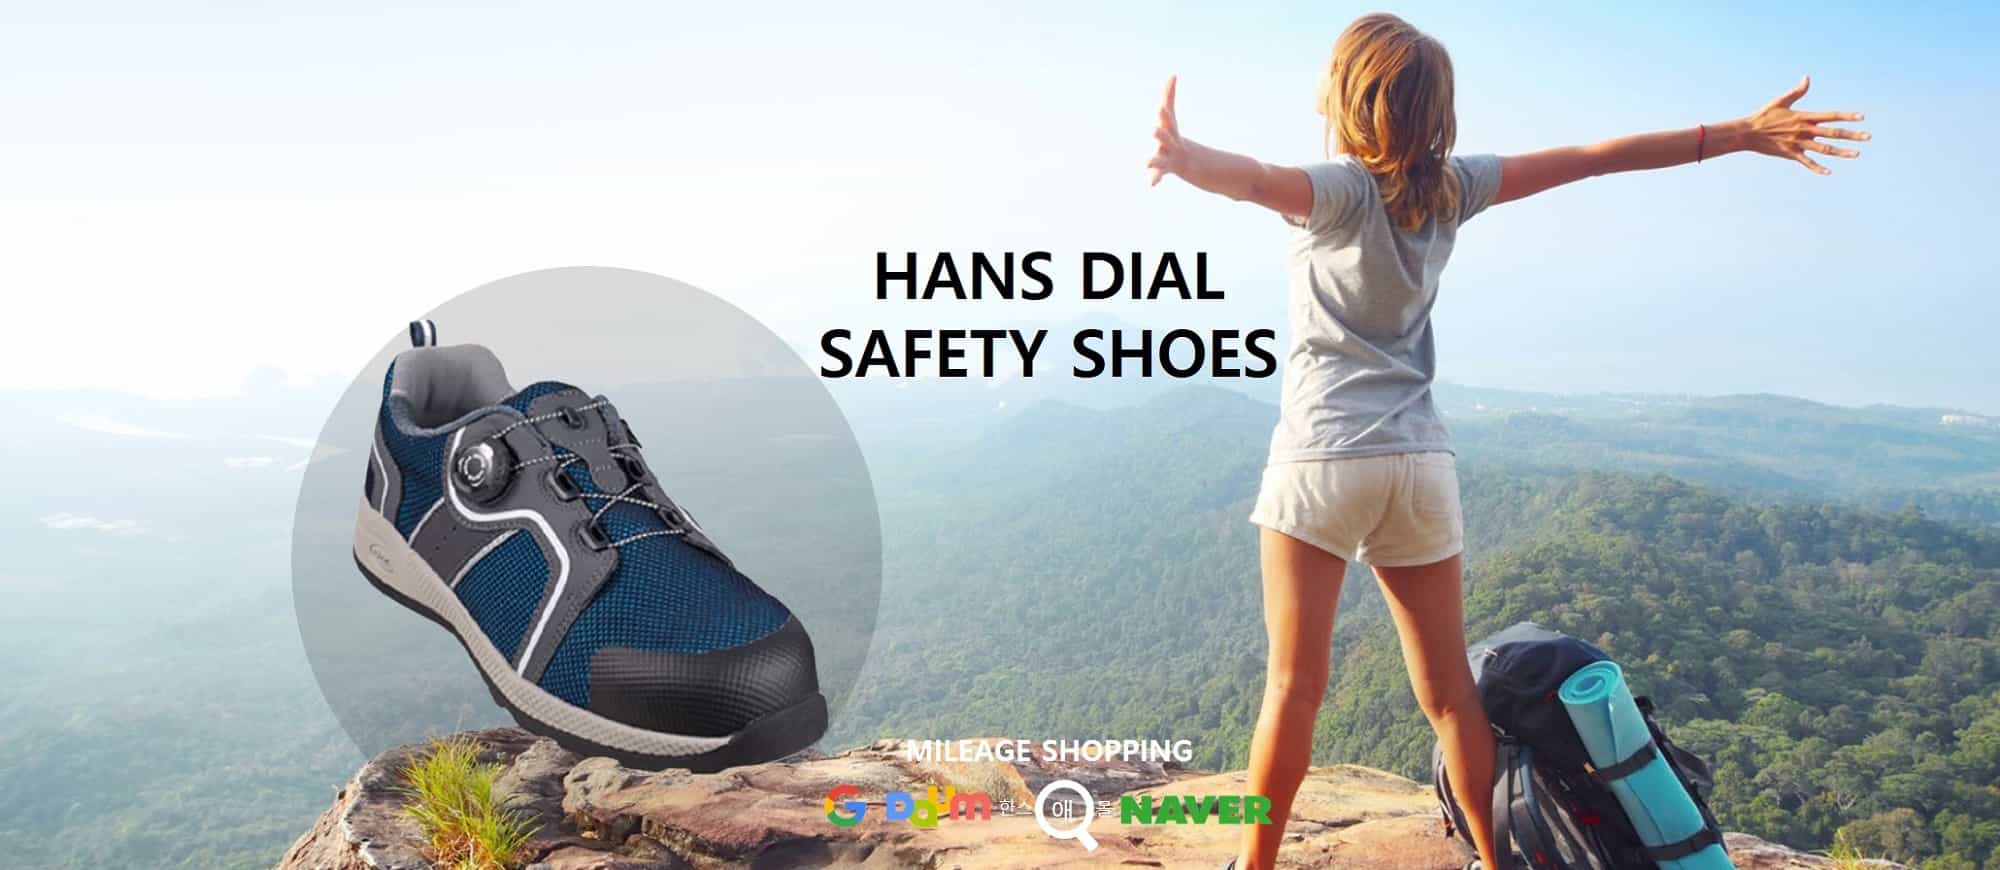 HANS DIAL SAFETY SHOES